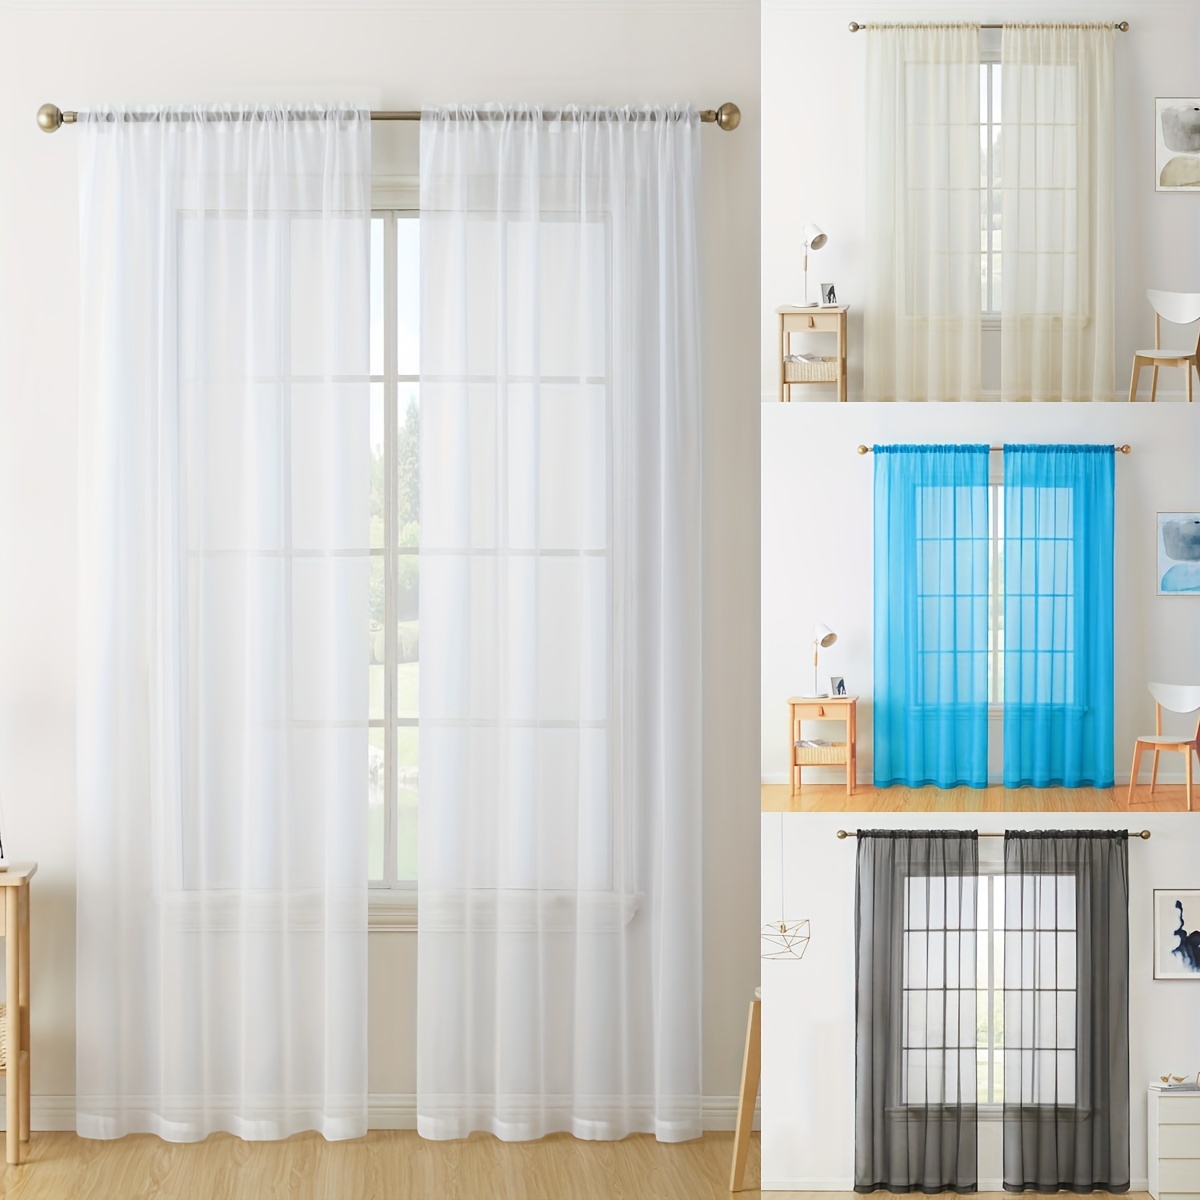 

2pcs Sheer Curtain Voile Window Treatment Rod Pocket Curtain Panels For Kitchen, Bedroom And Living Room Home Decor